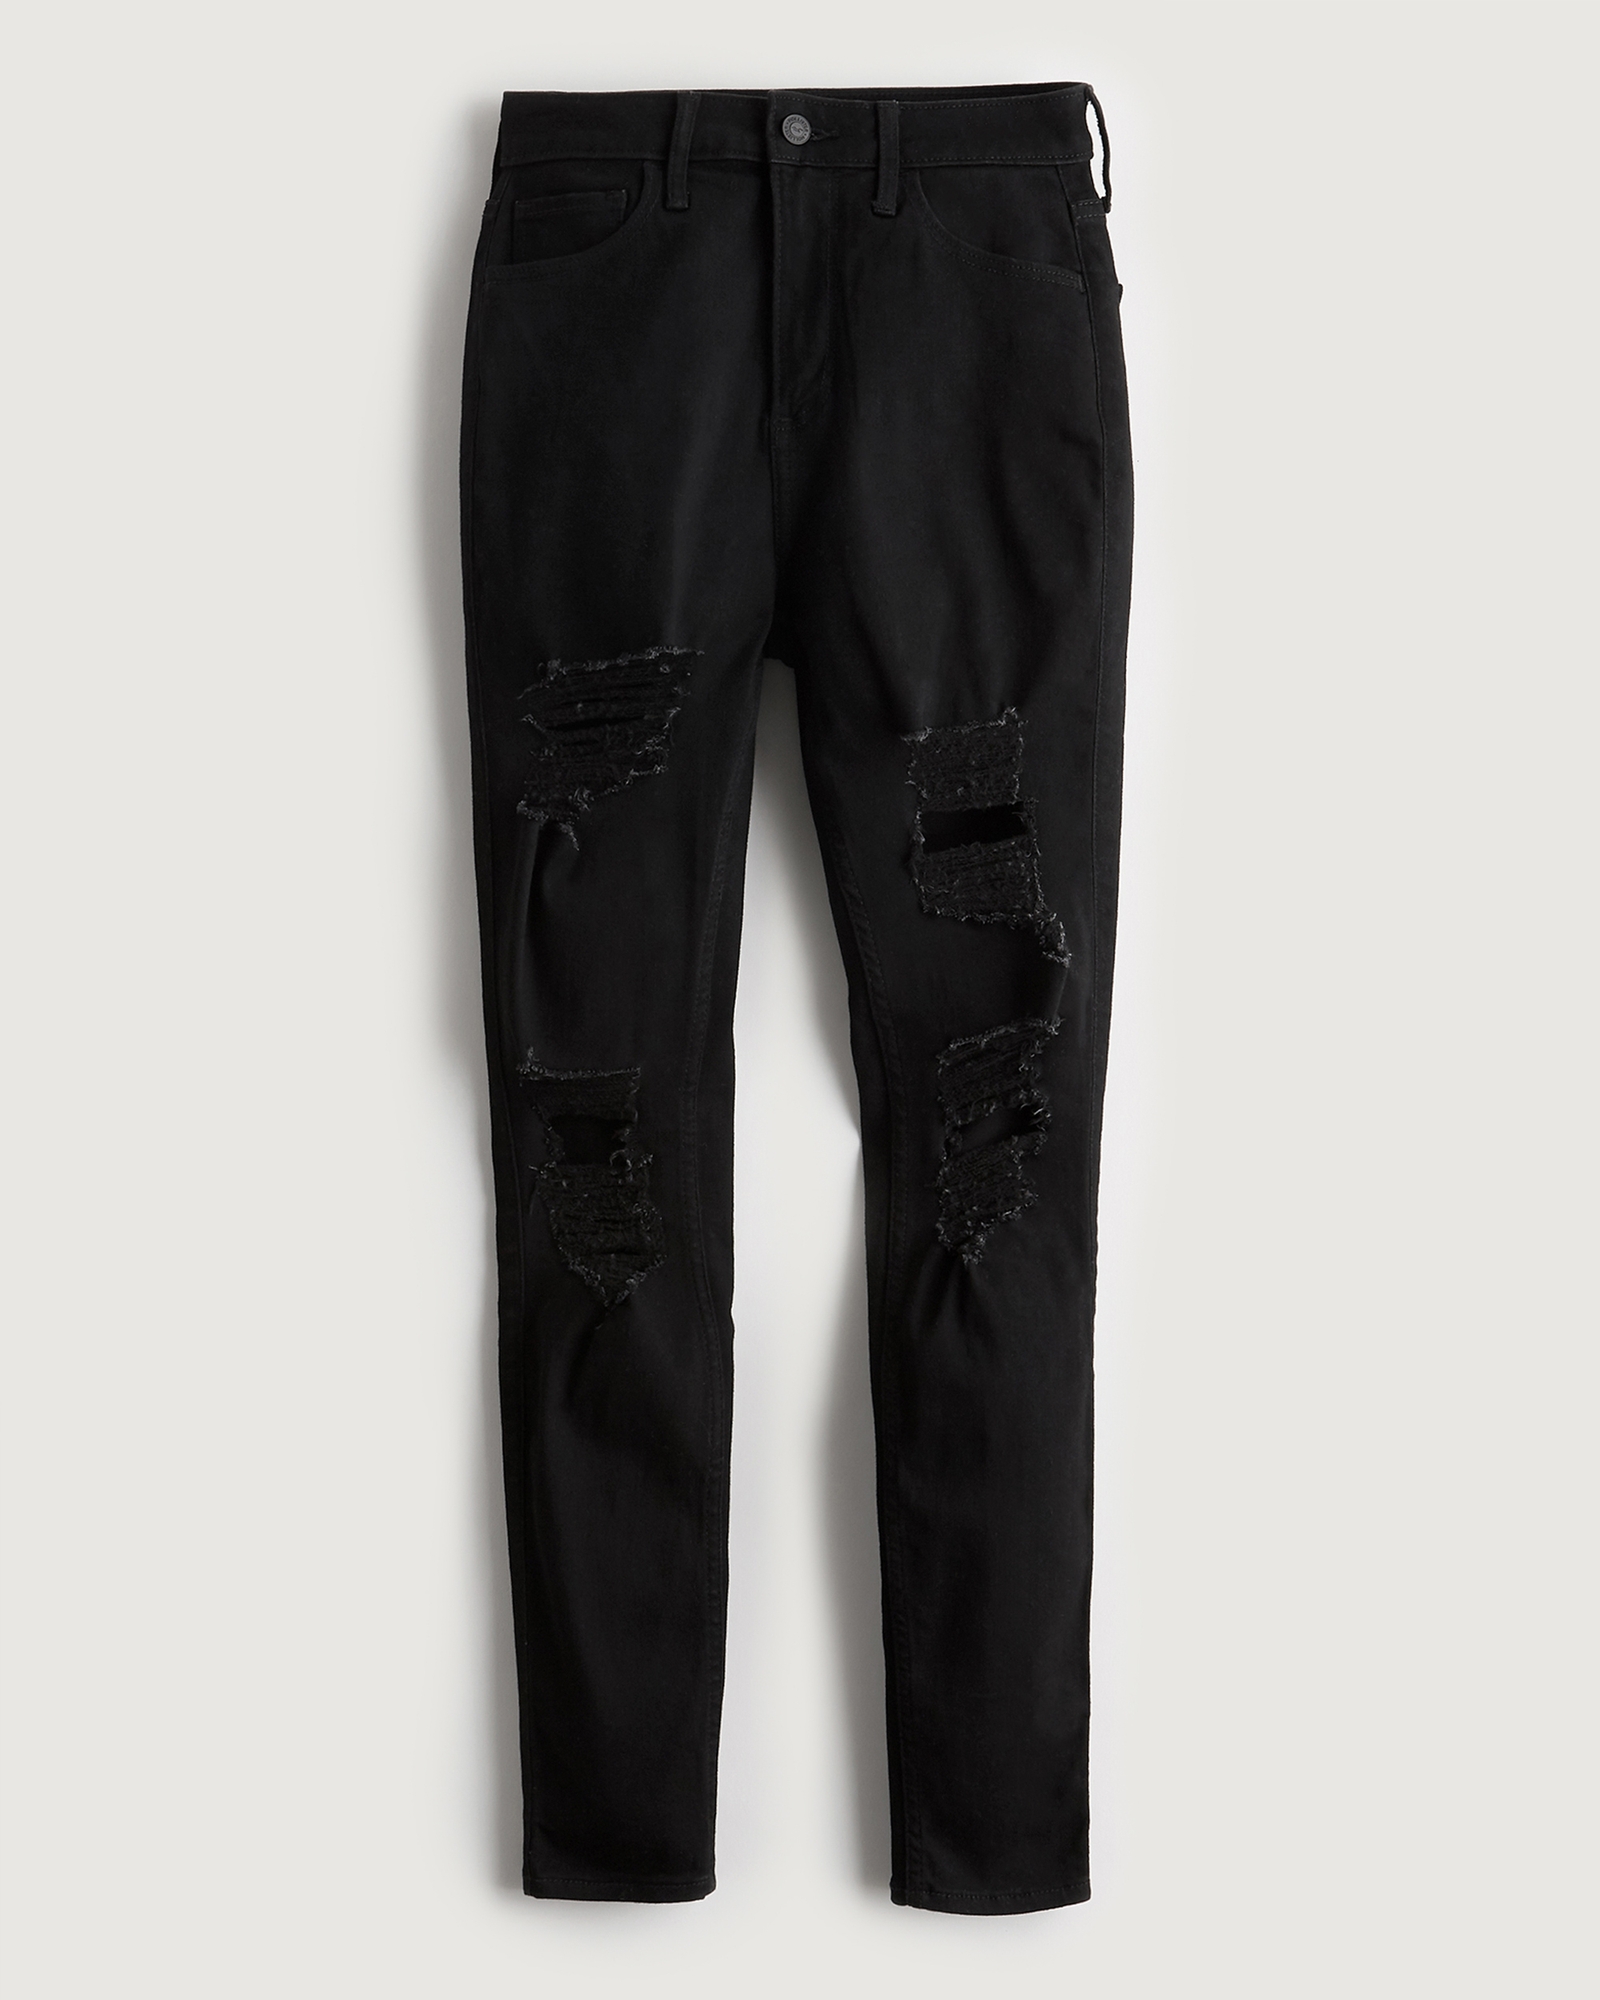 Hollister hourglass skinny jeans in black